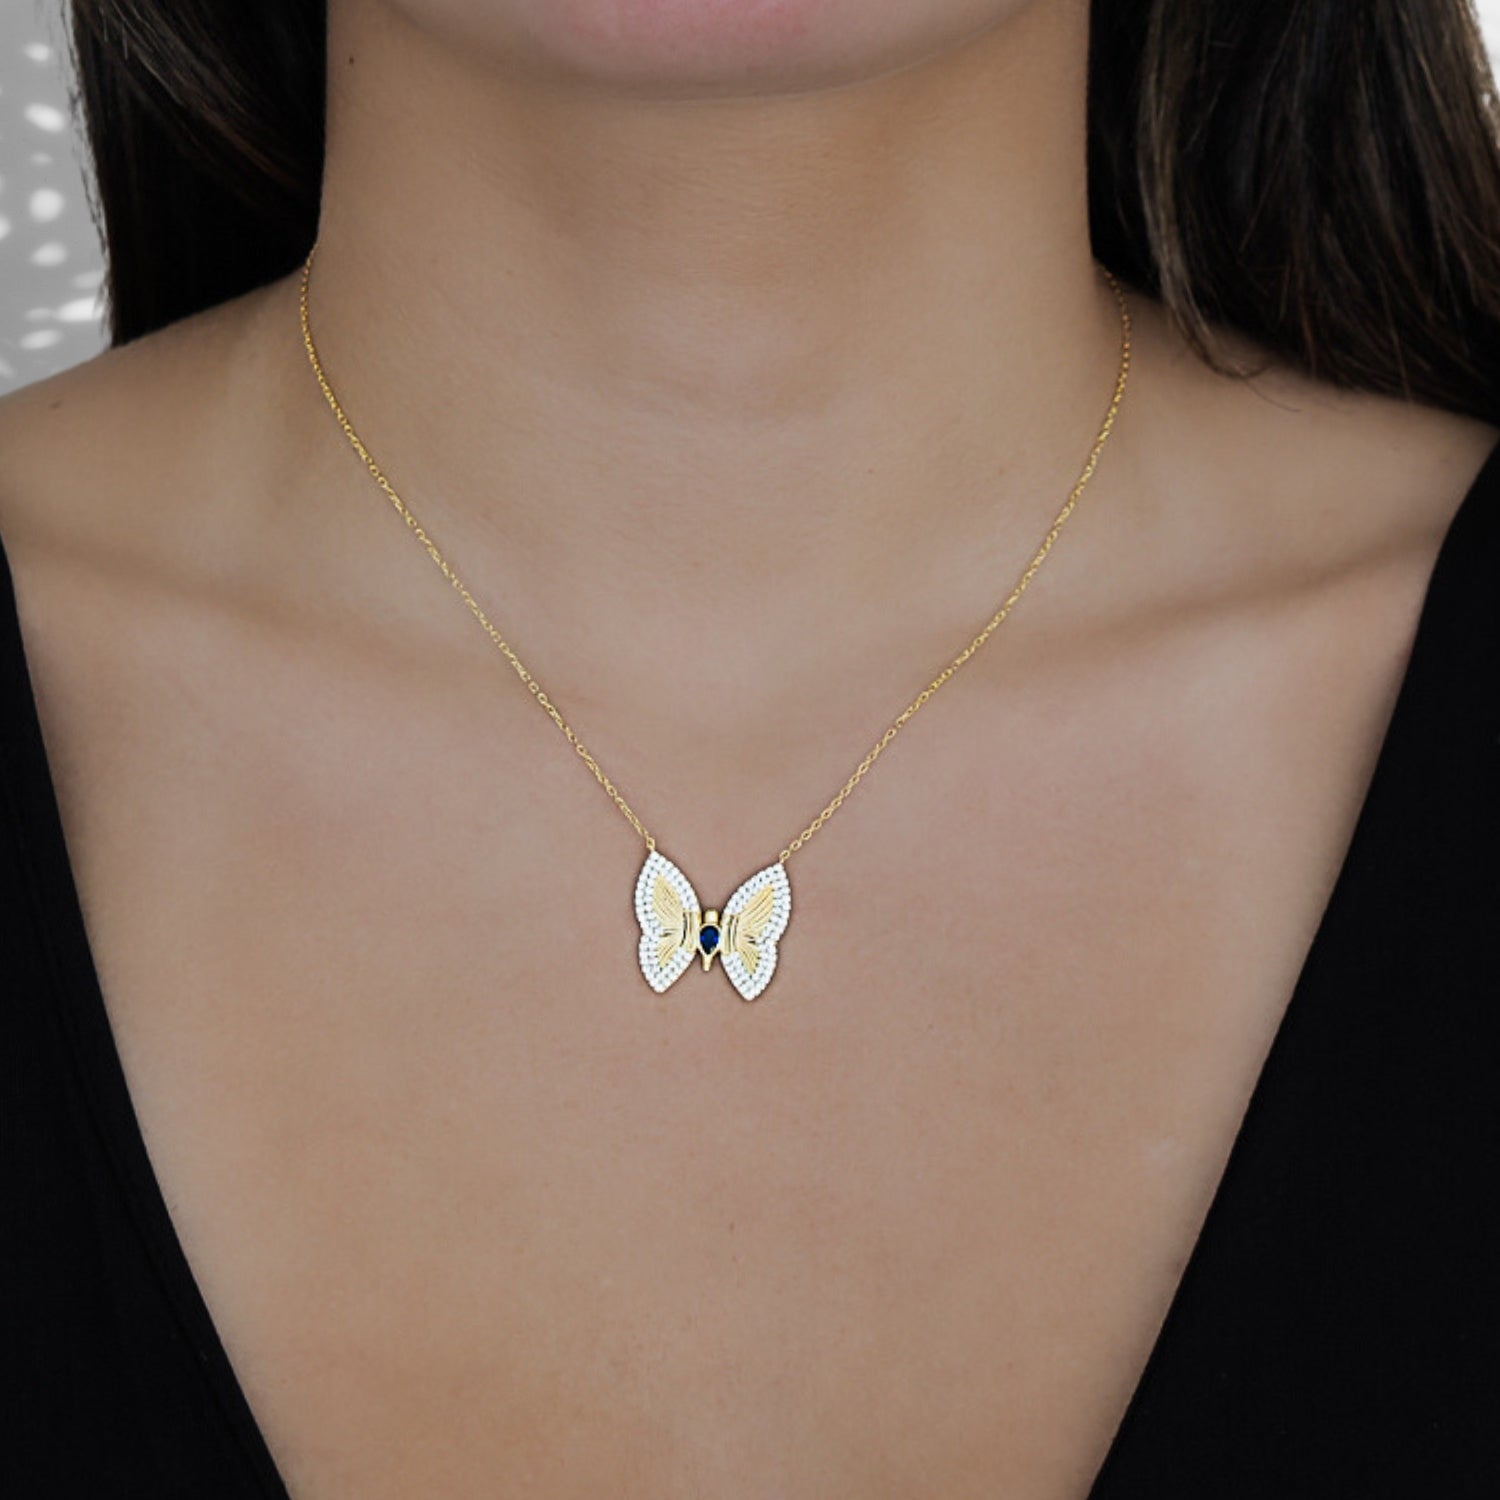 Model wearing the Gold Sparkly Hope Butterfly Necklace, radiating confidence and embracing the symbolism of hope and transformation.